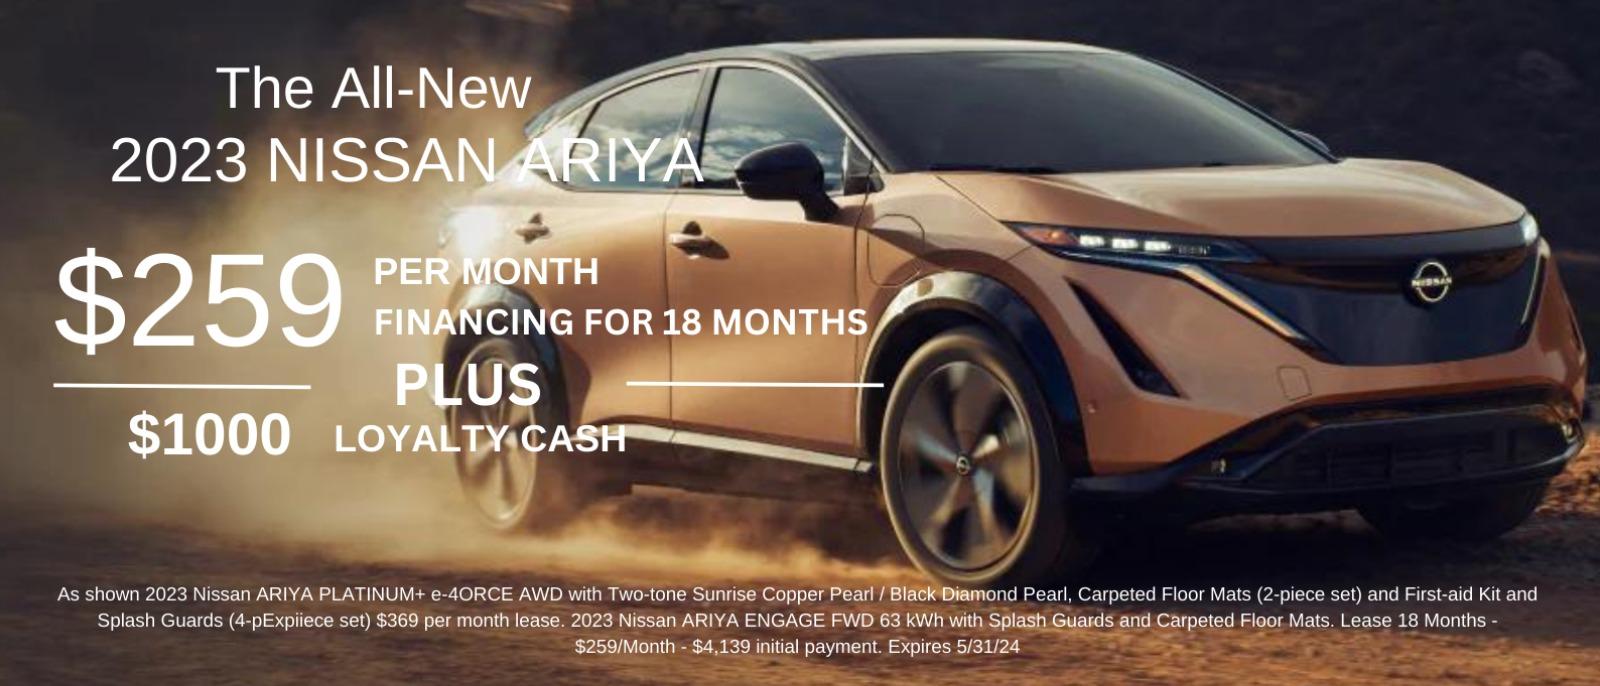 $259 PER MONTH FINANCING FOR 18 MONTHS PLUS $1000 LOYALTY CASH